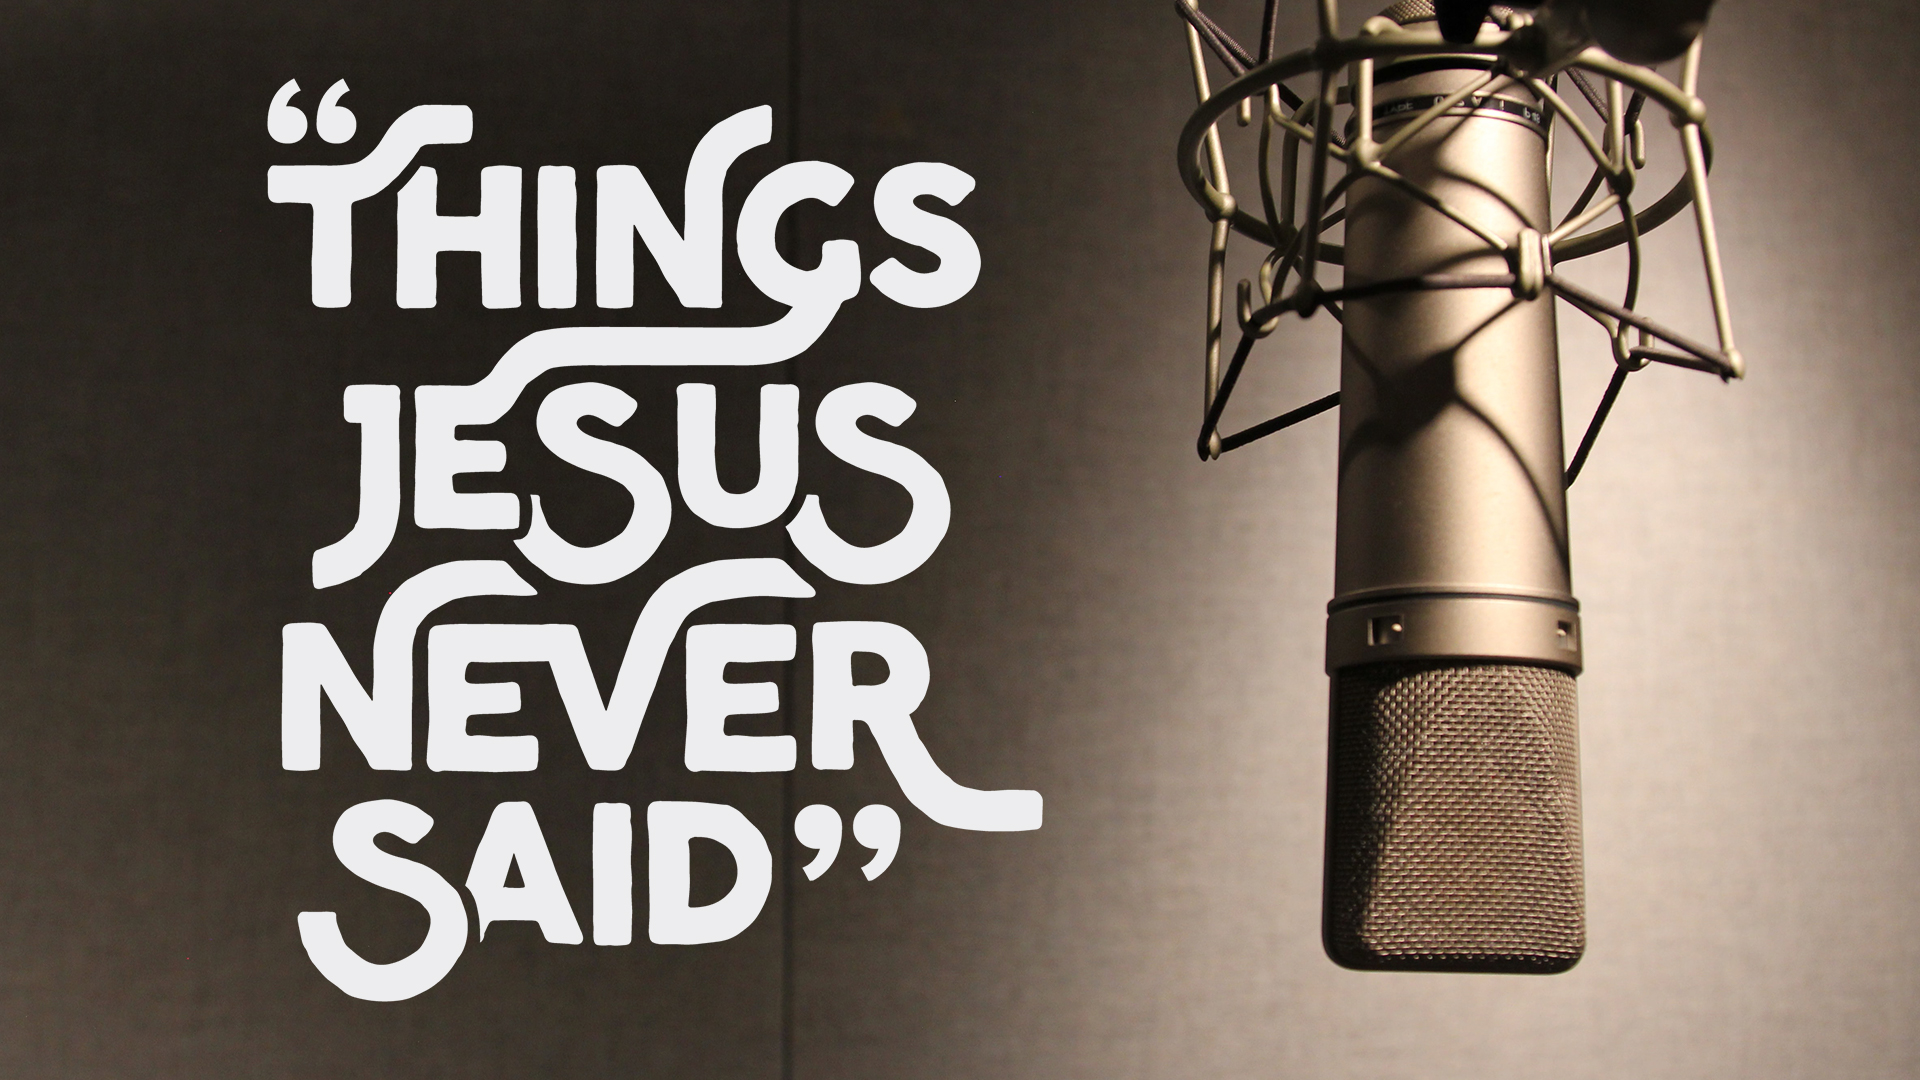 Jesus Never Said: "All Sins are Equal in the Eyes of God